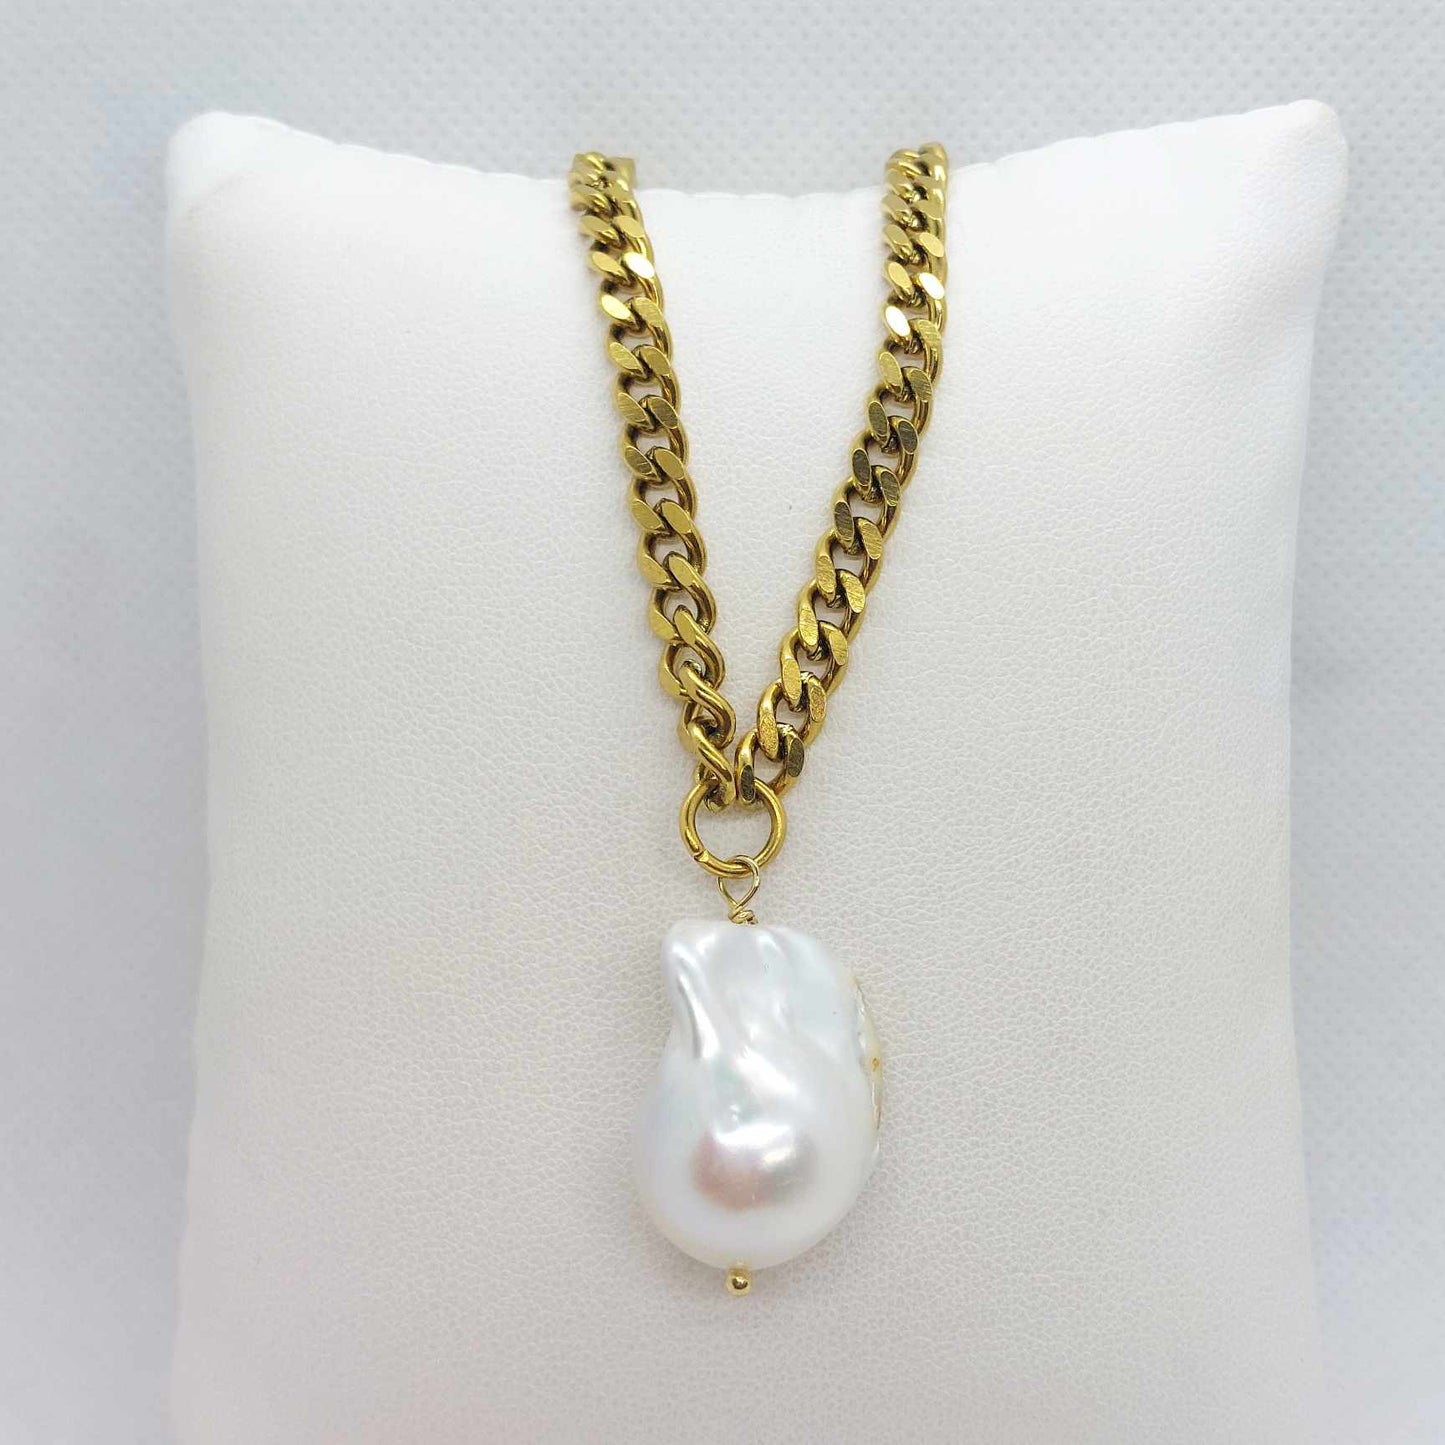 Natural Baroque Pearl Pendant with thick Stainless Steel Gold Plated Chain Necklace